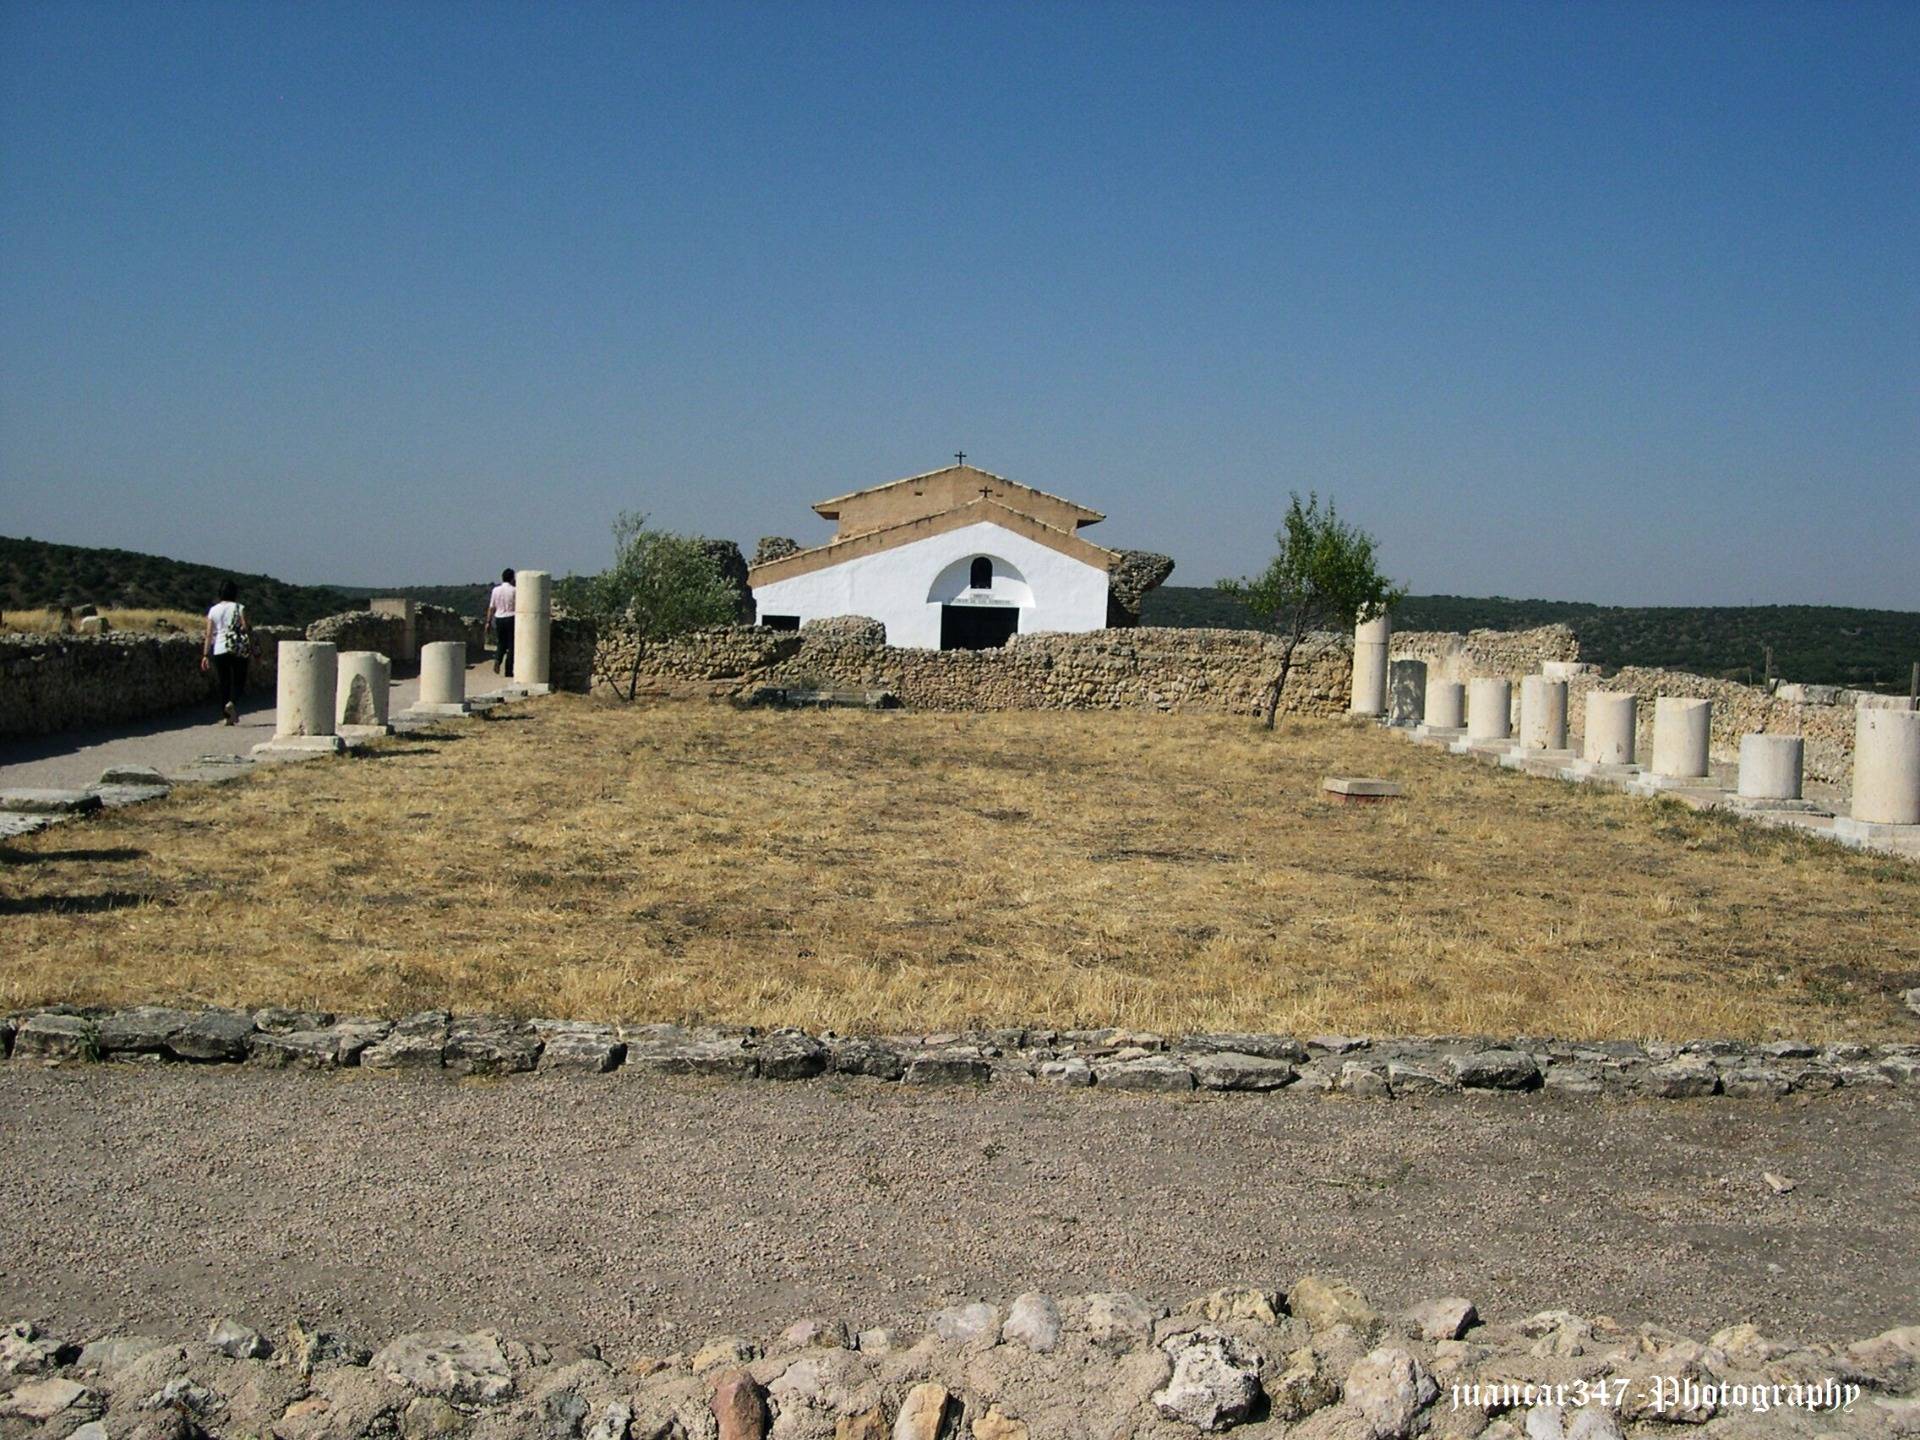 Ruins of the Baths and Christian hermitage in the background